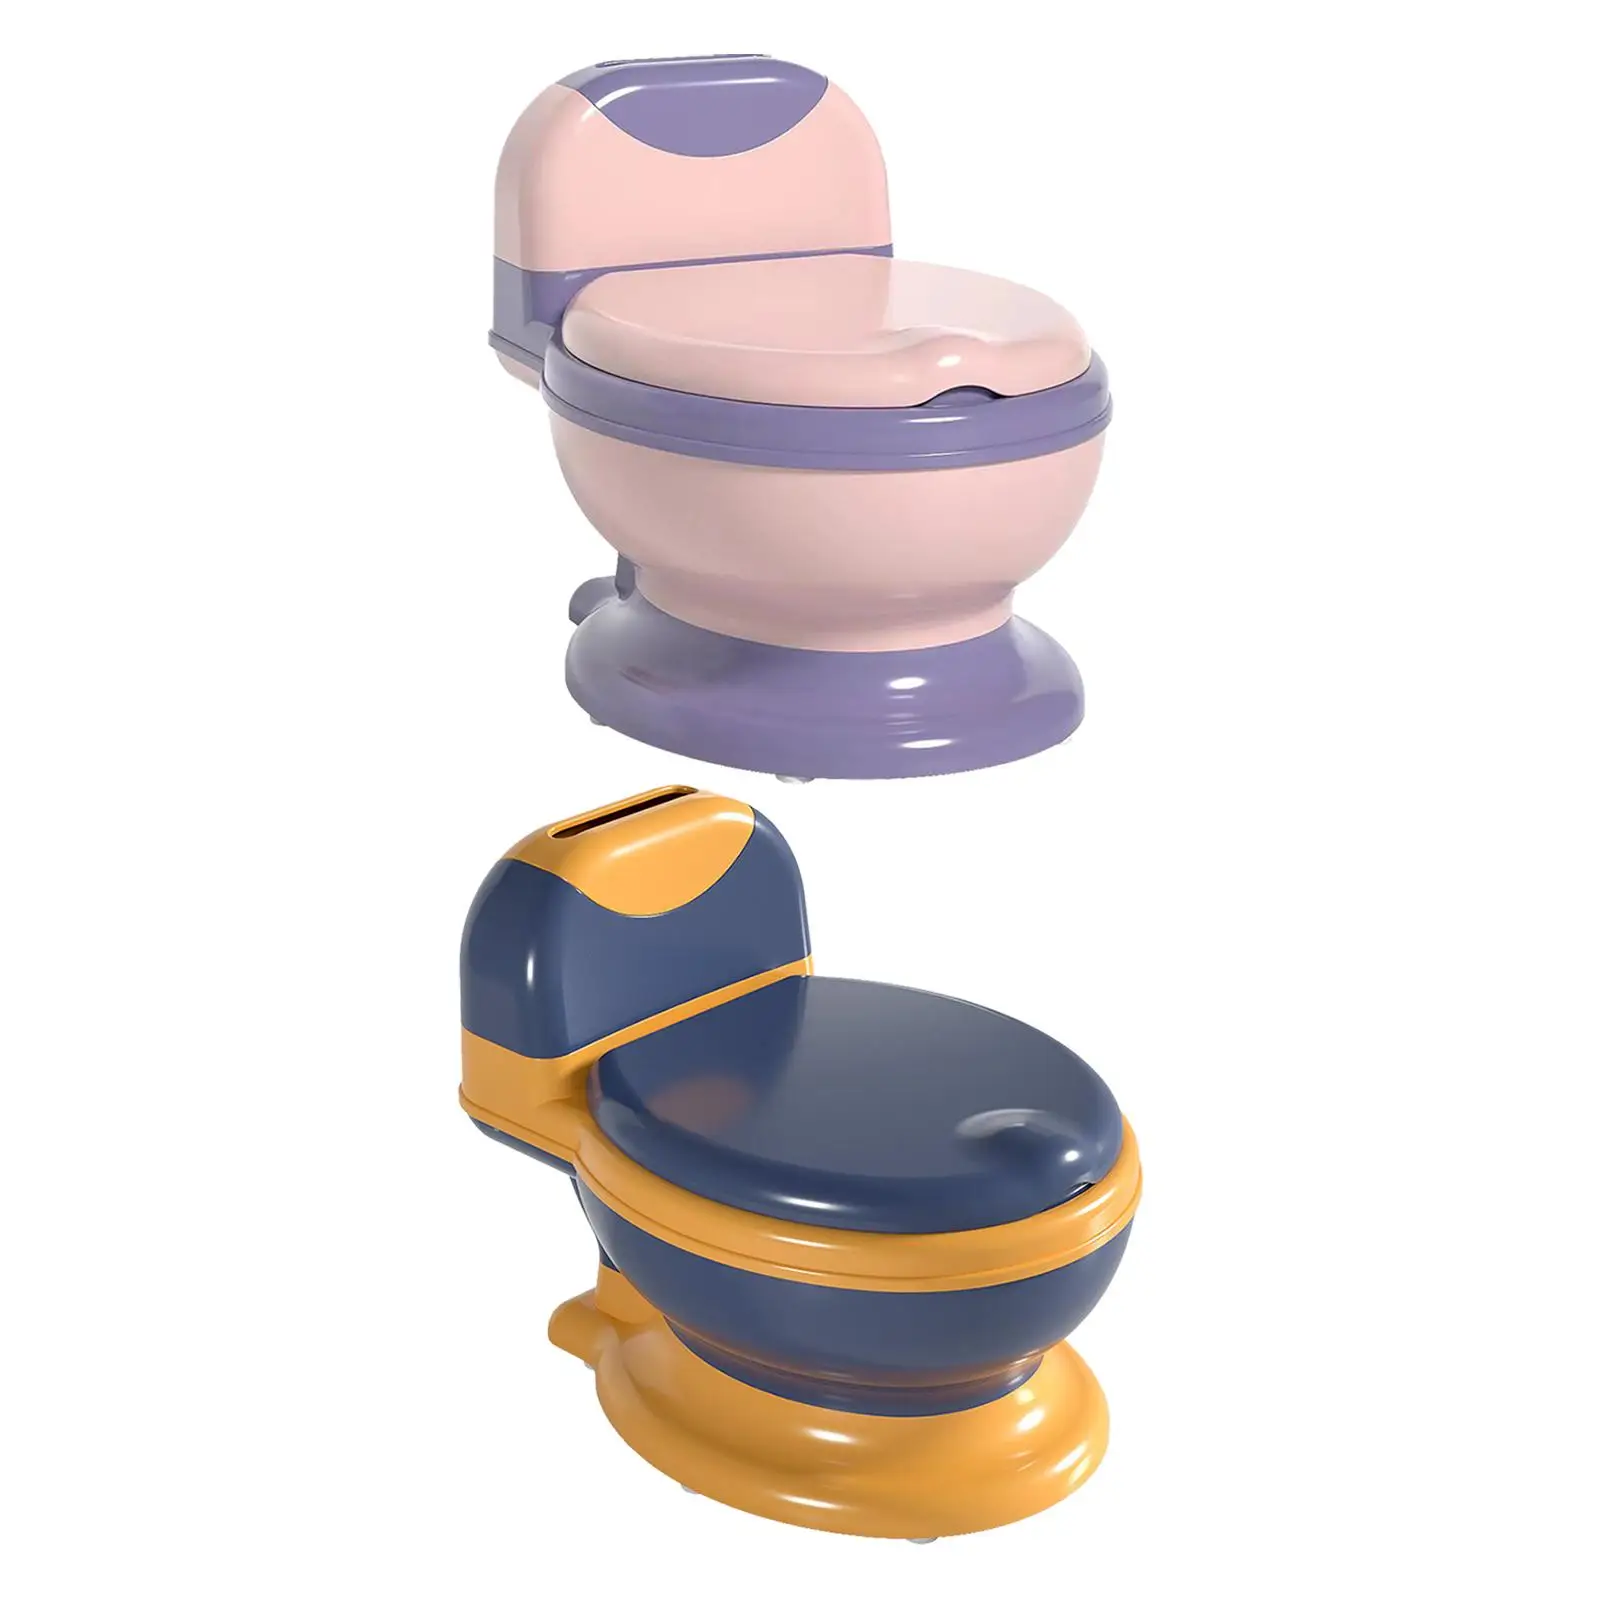 Potty Train Toilet Portable Comfortable Potty Train Seat Realistic Toilet Real Feel Potty for Toddlers Baby Girls Children